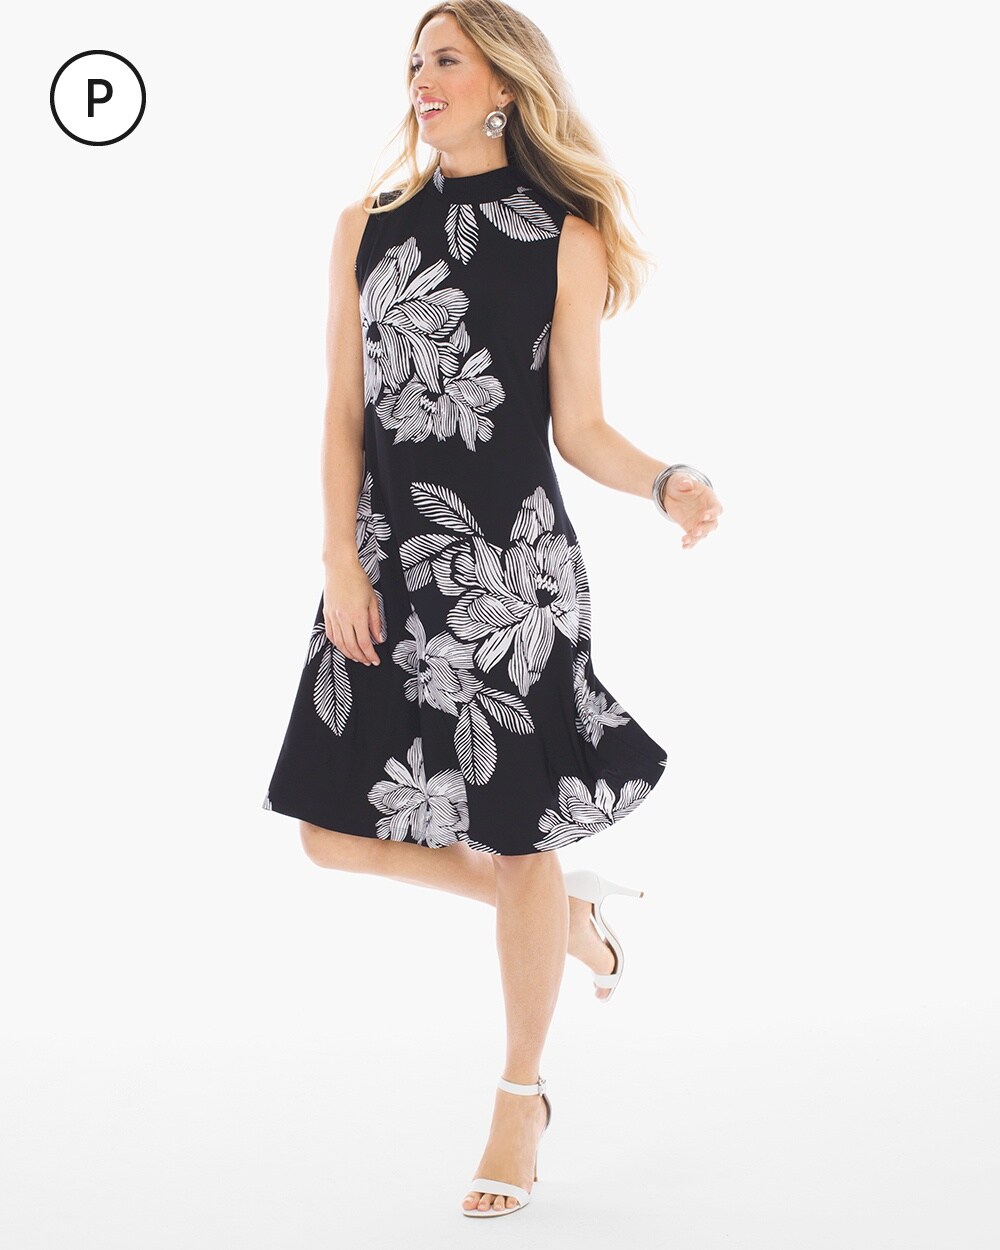 Petite Exotic Etched Floral Dress